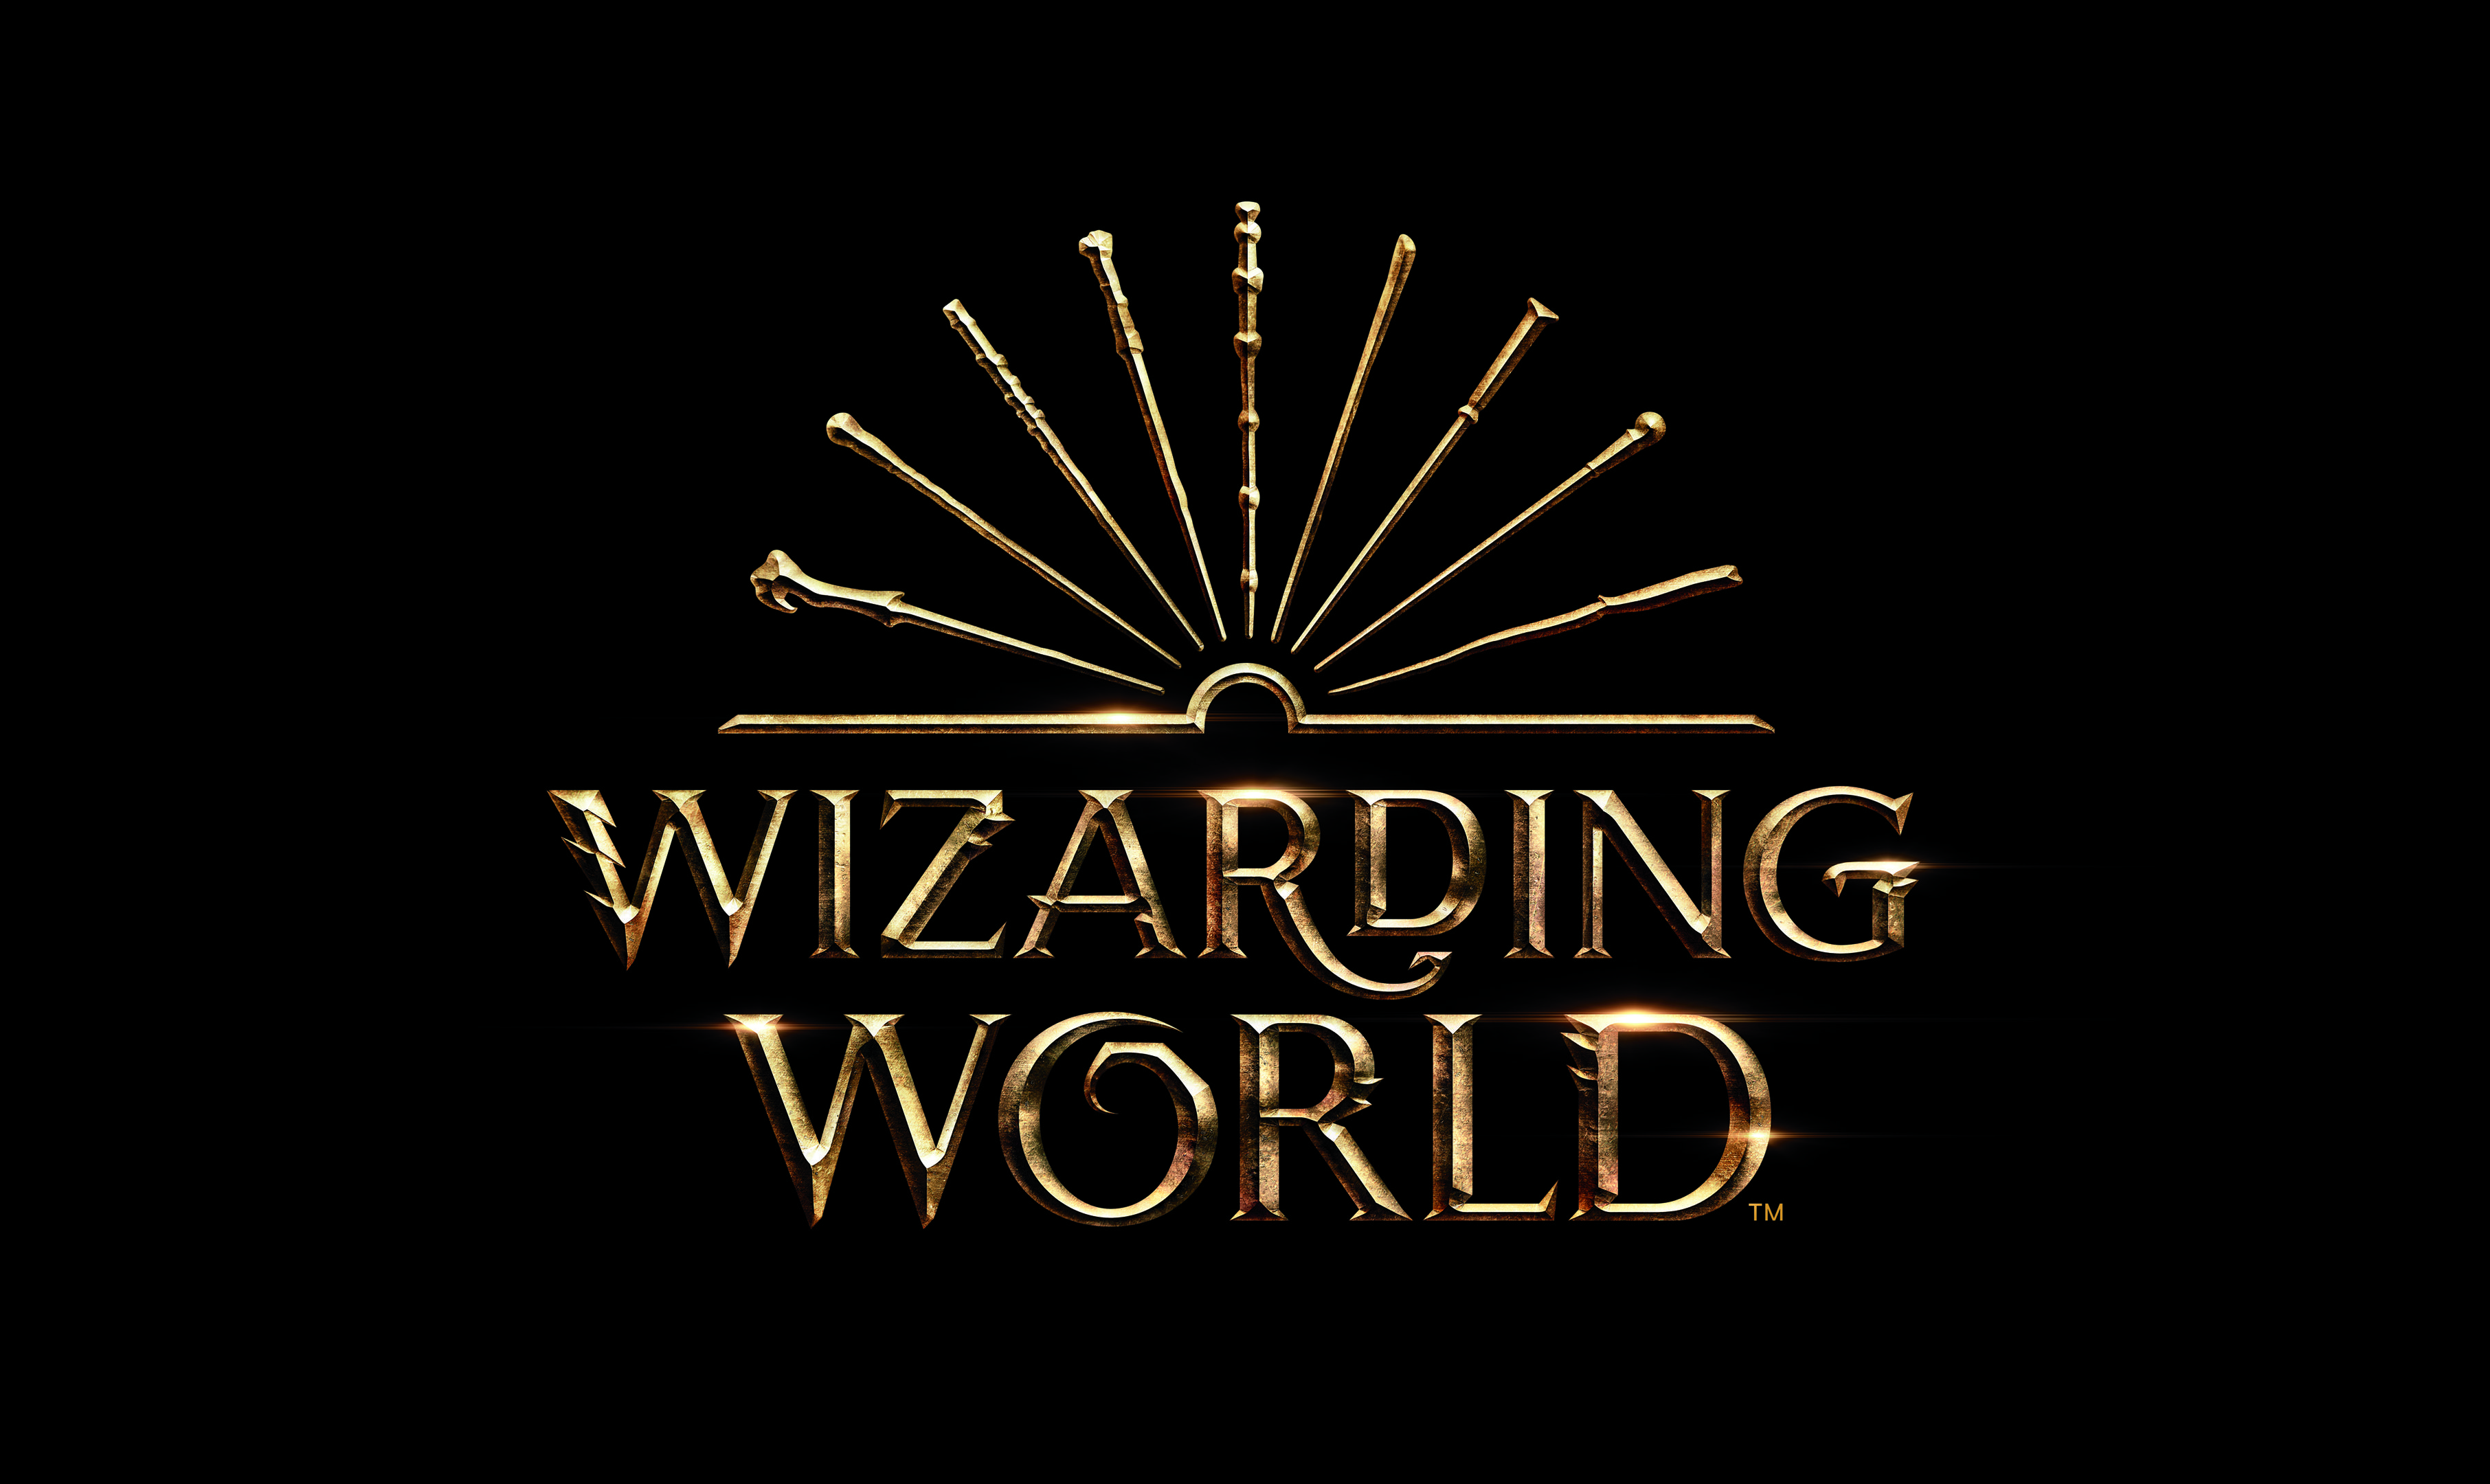 I love the new Wizarding World logo! Here's the logo with the text removed for wallpaper